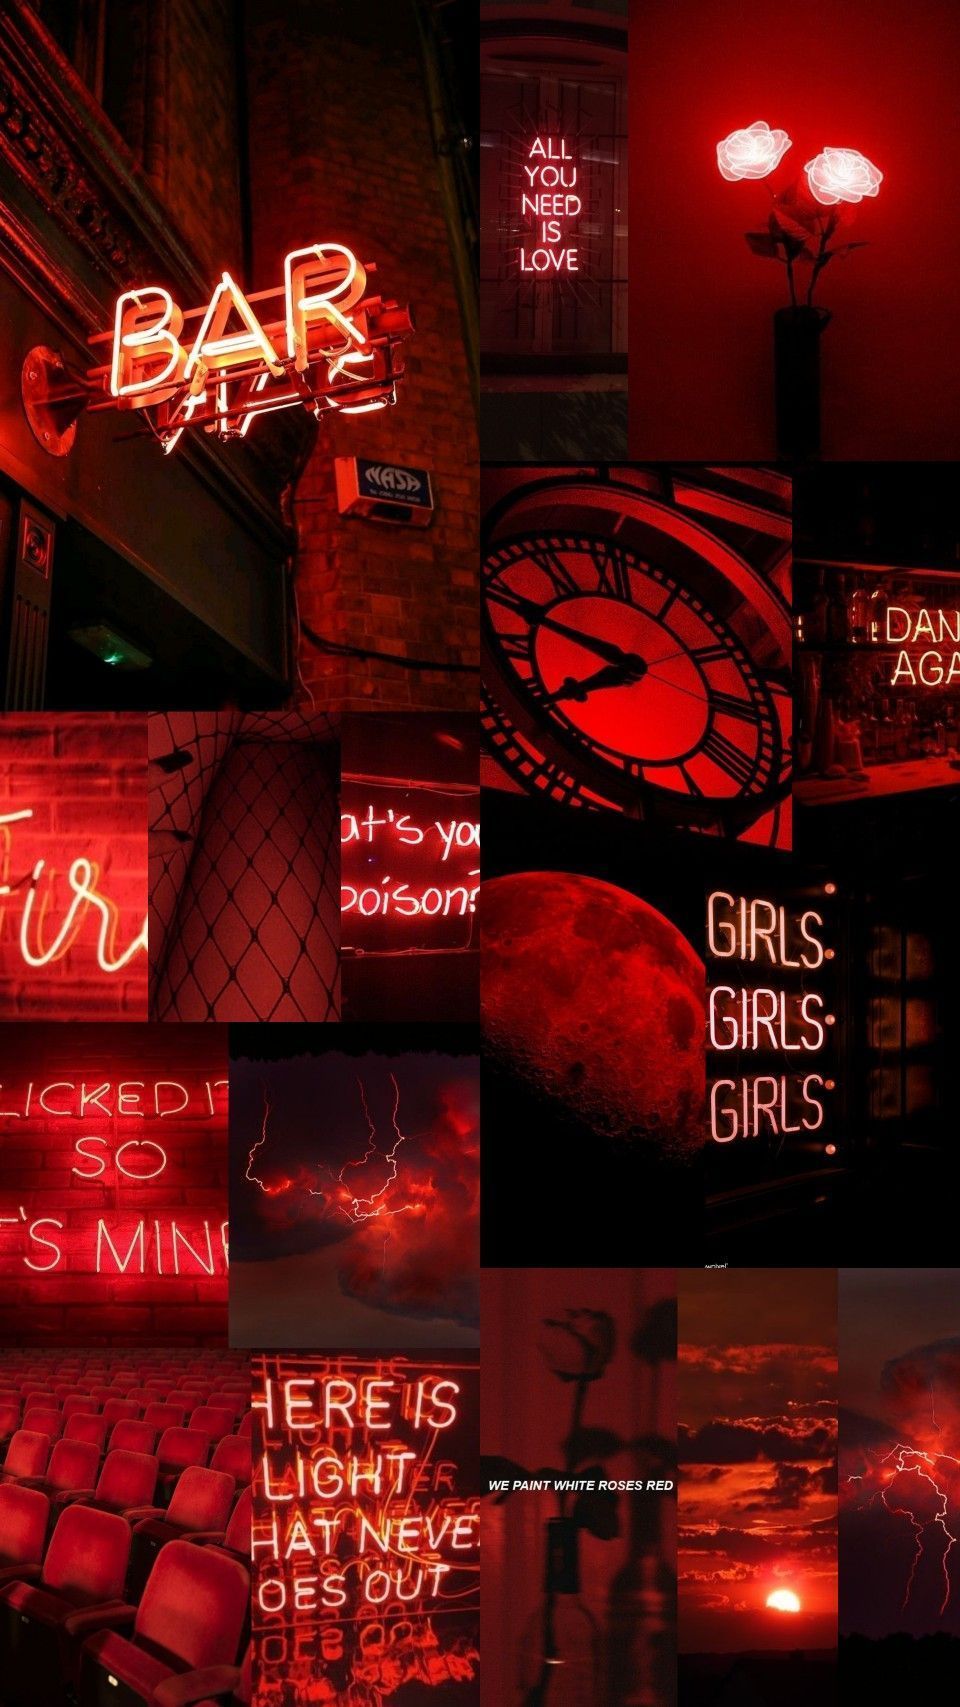 Red aesthetic wallpaper, red neon signs, red sunset, red aesthetic pictures, red aesthetic backgrounds, red aesthetic phone wallpaper, red aesthetic phone backgrounds, red aesthetic phone screensaver, red aesthetic phone wallpaper red aesthetic phone screensaver - IPhone red, neon red